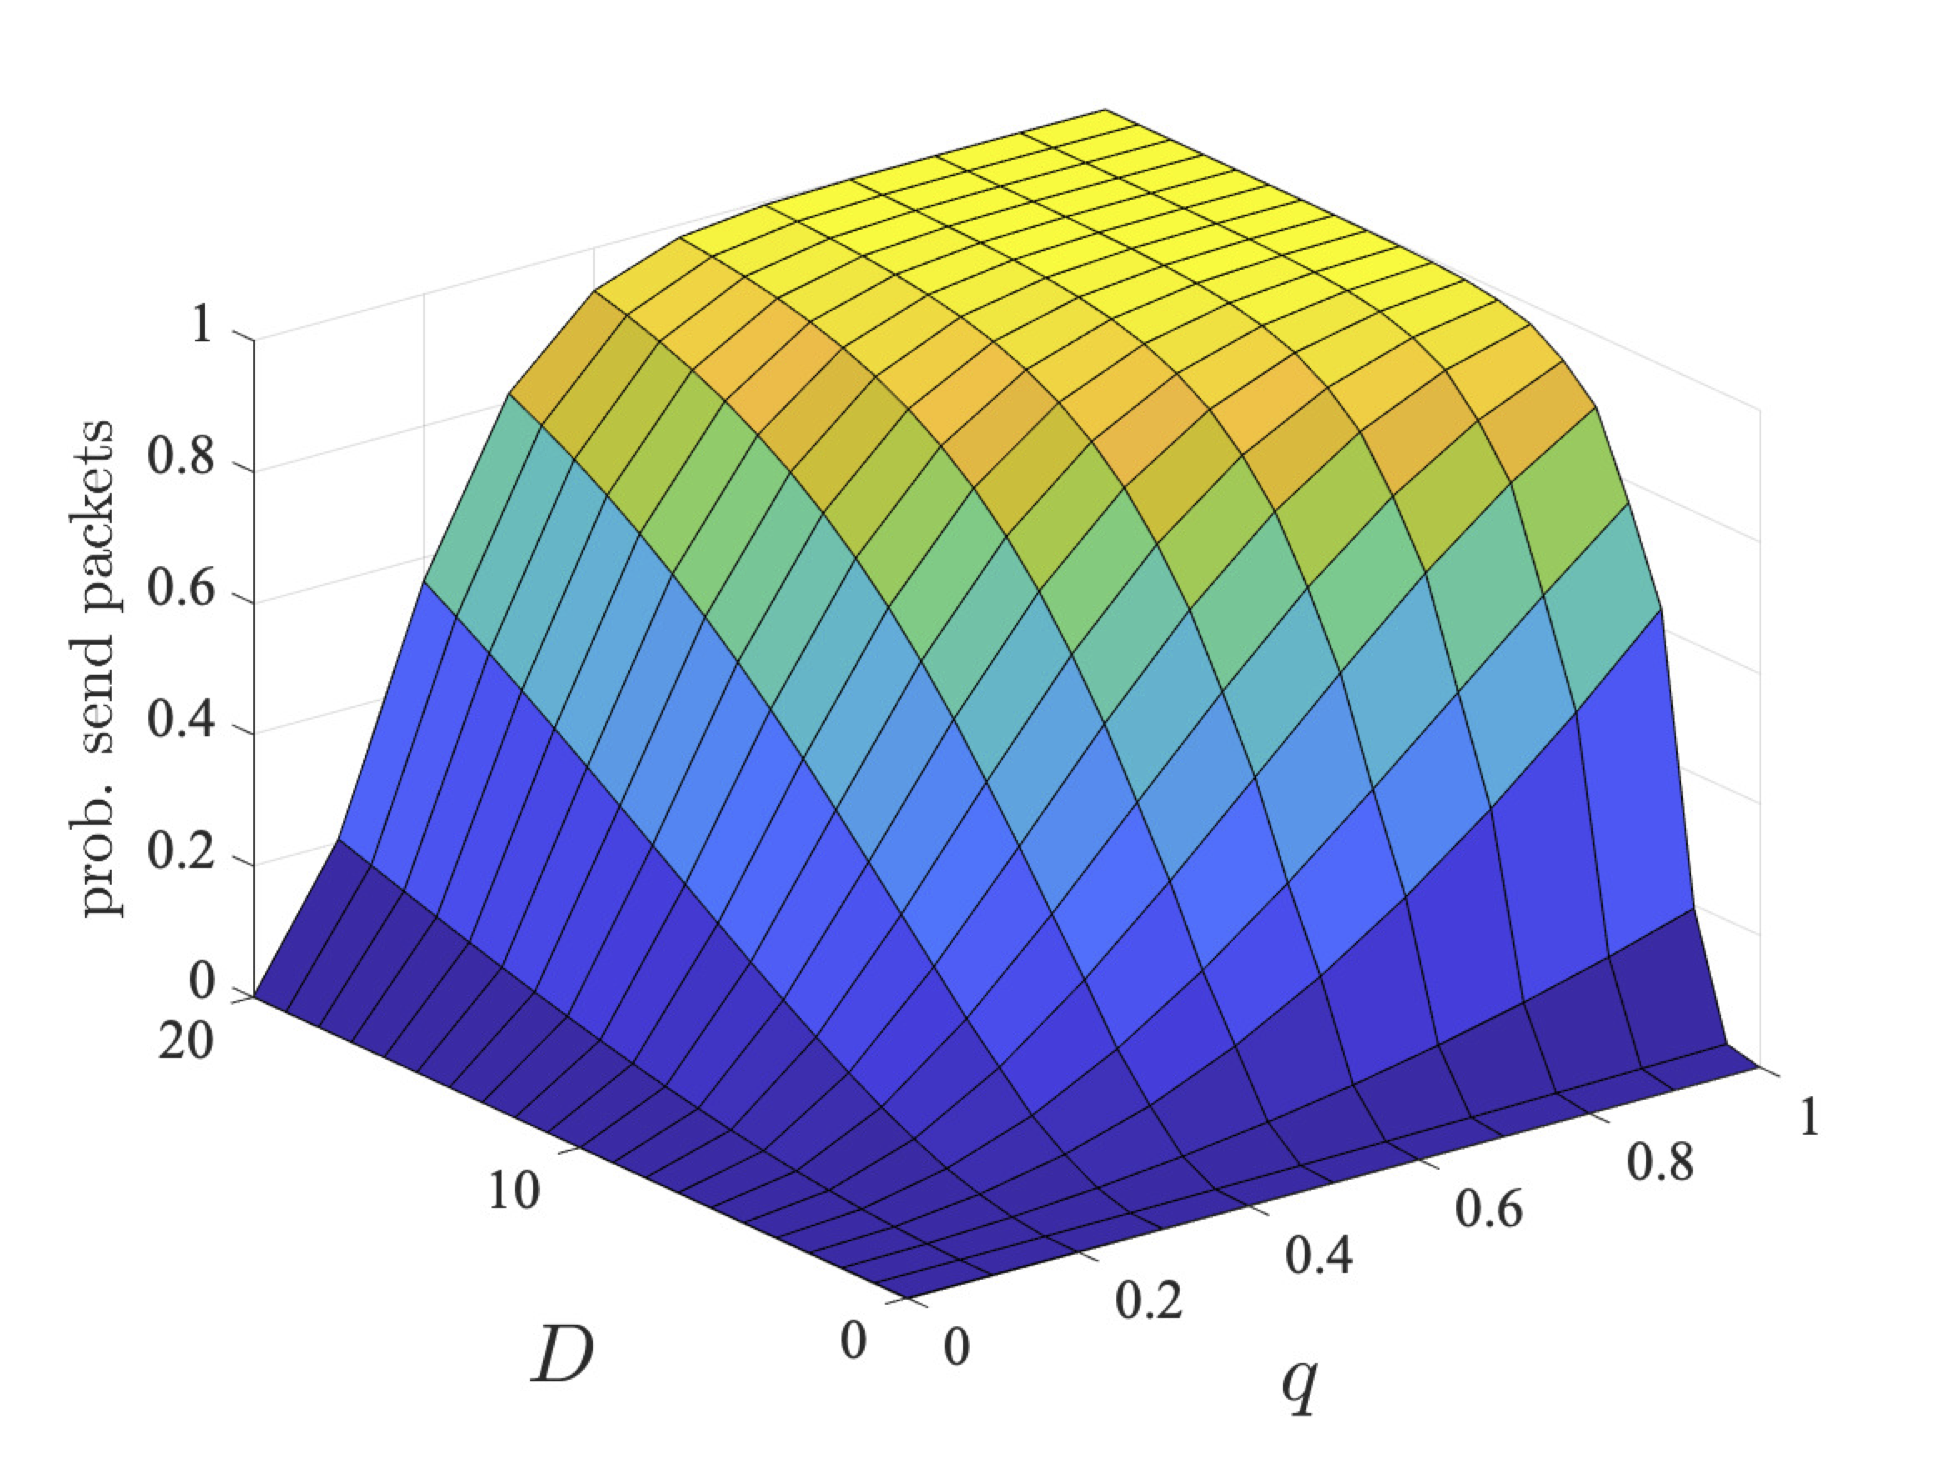 plot: maximum probability users 2 and 3 can ensure they send their packets within a deadline (bcmax=1)